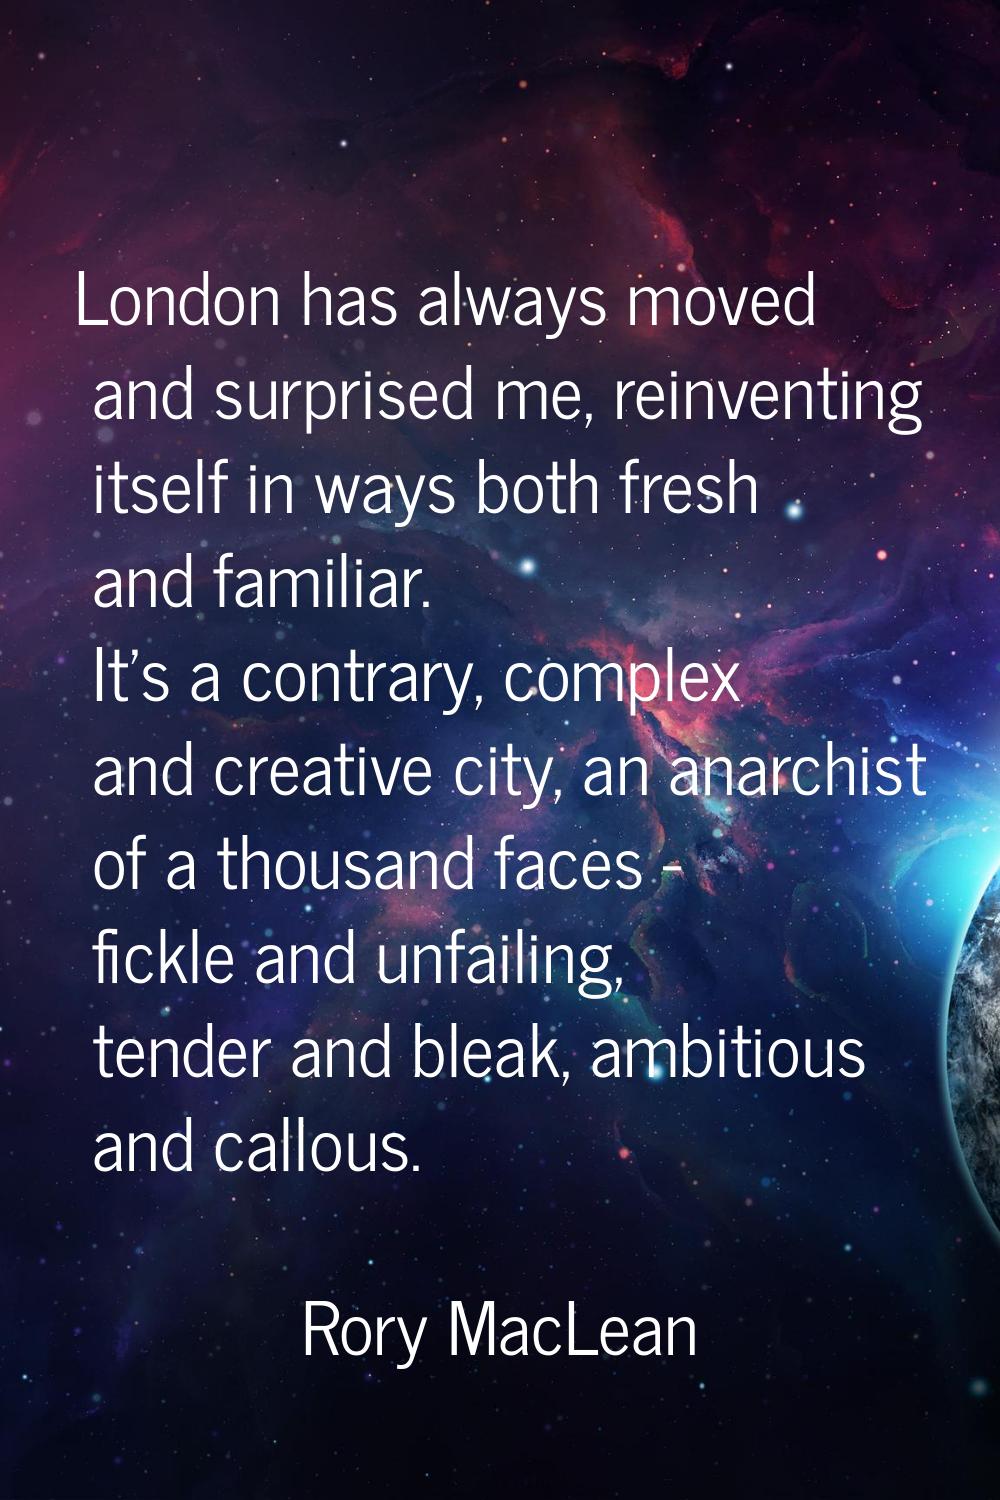 London has always moved and surprised me, reinventing itself in ways both fresh and familiar. It's 